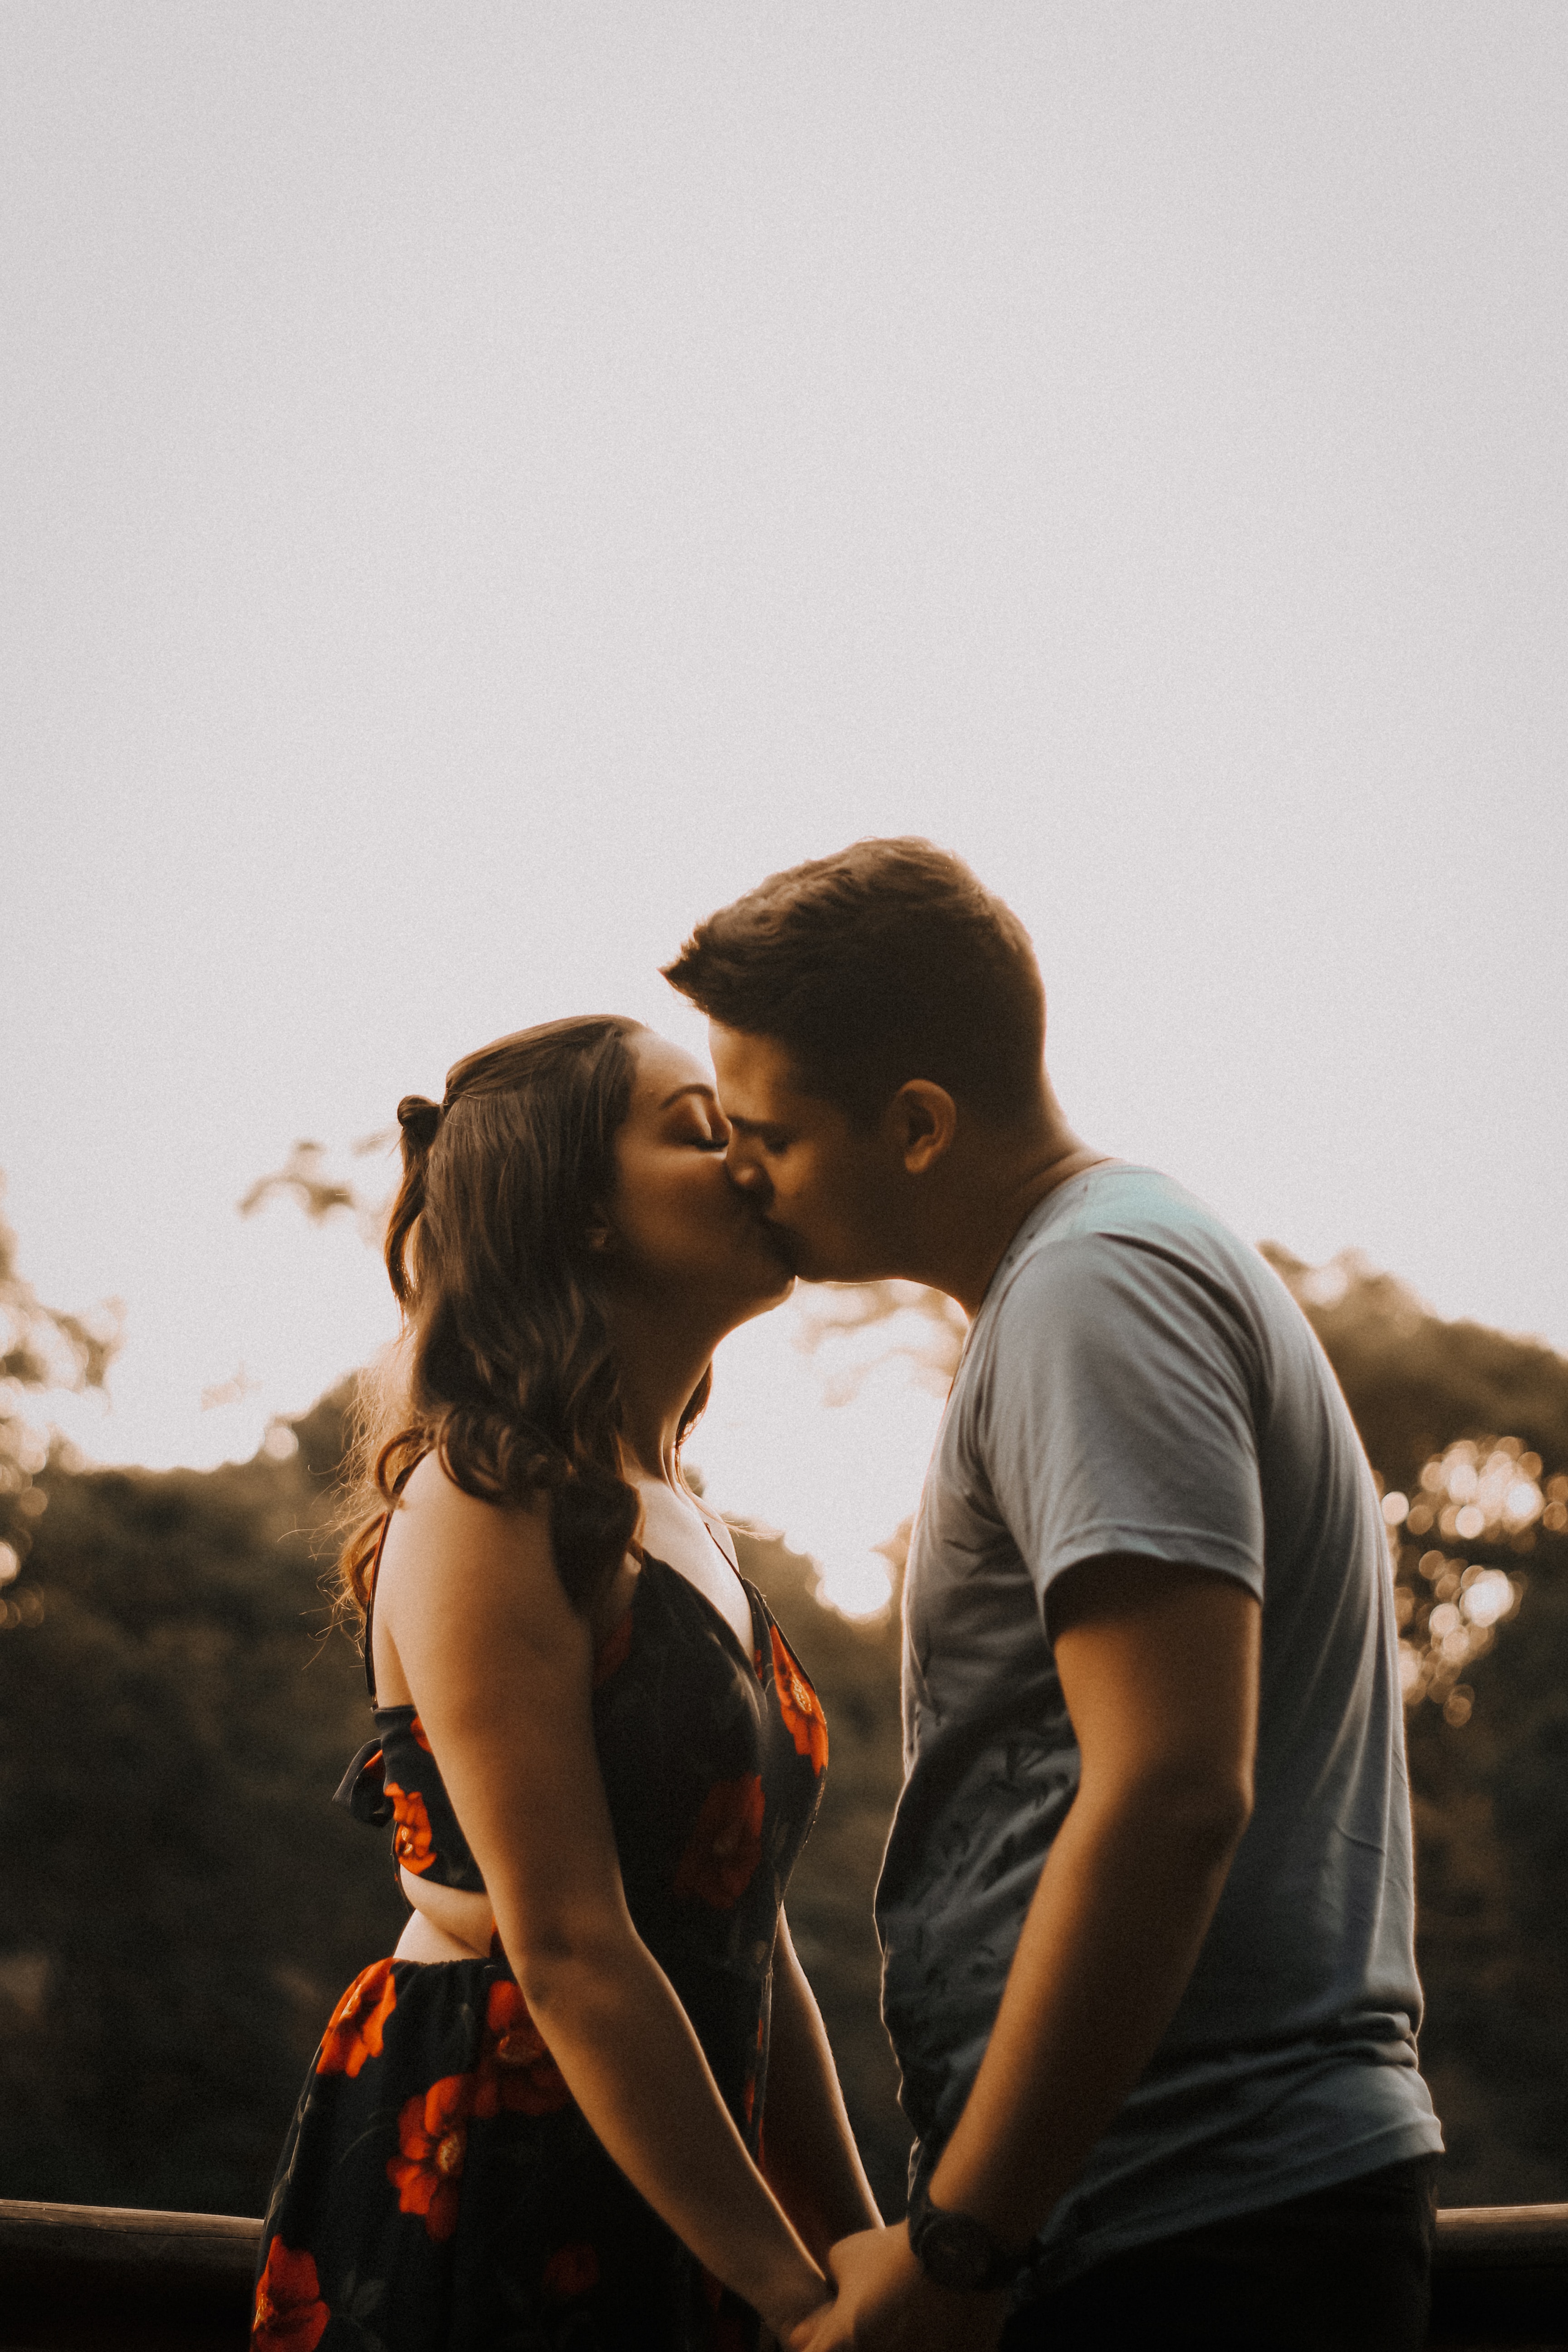 A photo of a couple kissing while holding hands  | Source: Unsplash